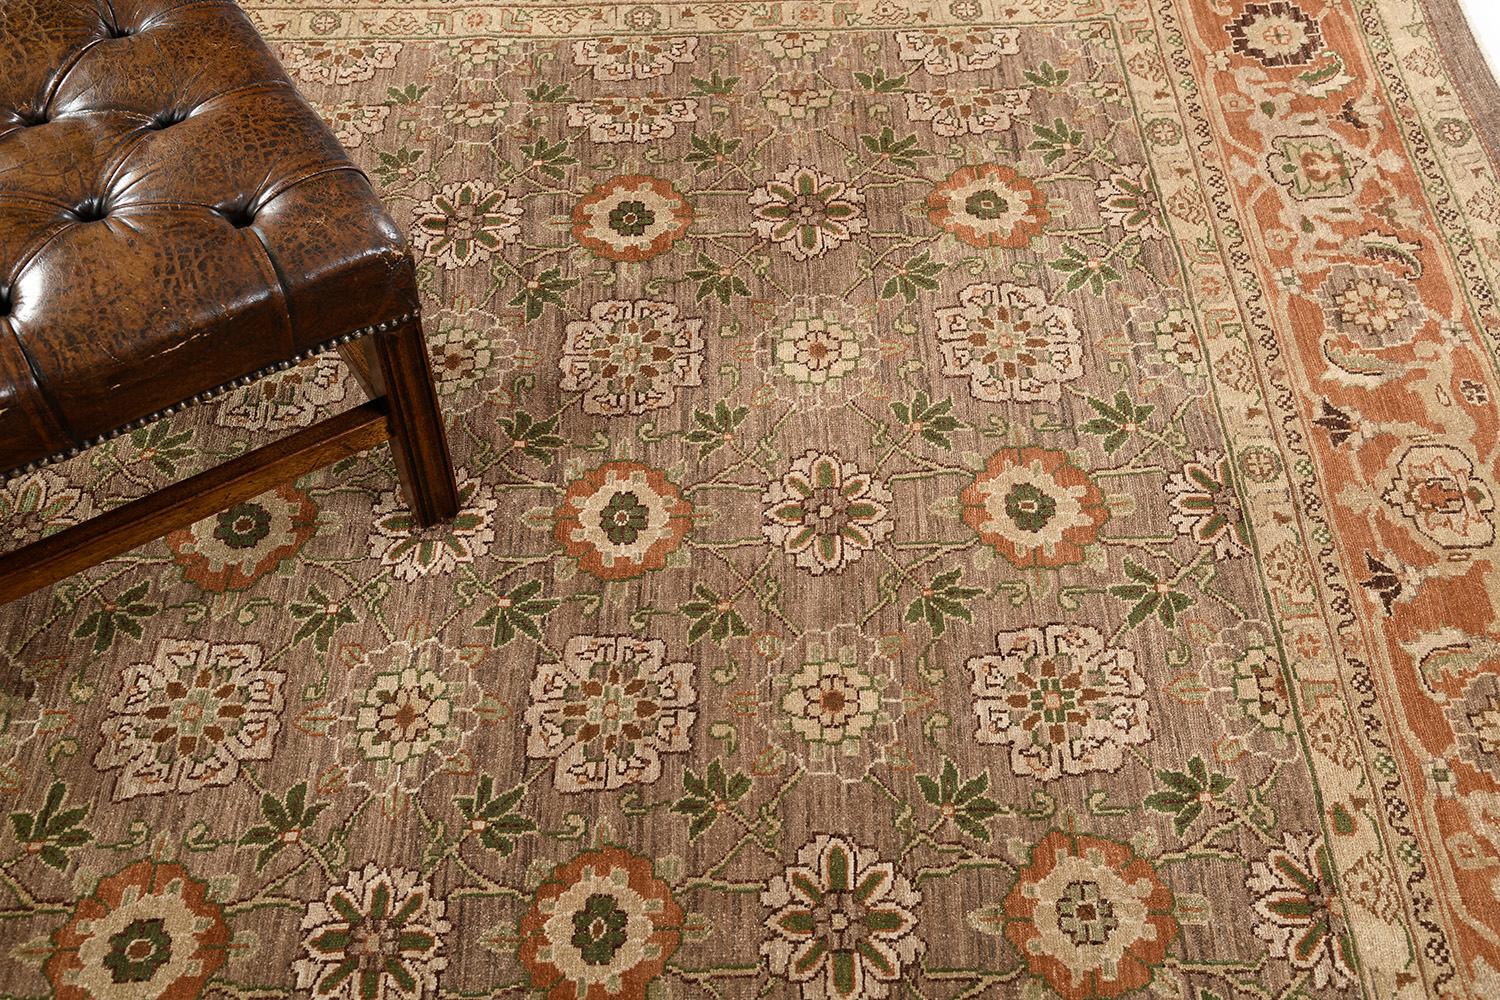 Known as the most authentic in terms of traditional style and motif, this iconic revival of Varamin rug features tones of camel, tan, and some touch of green. Meticulously hand-woven details where ornate flowers are aligned repeated all over the